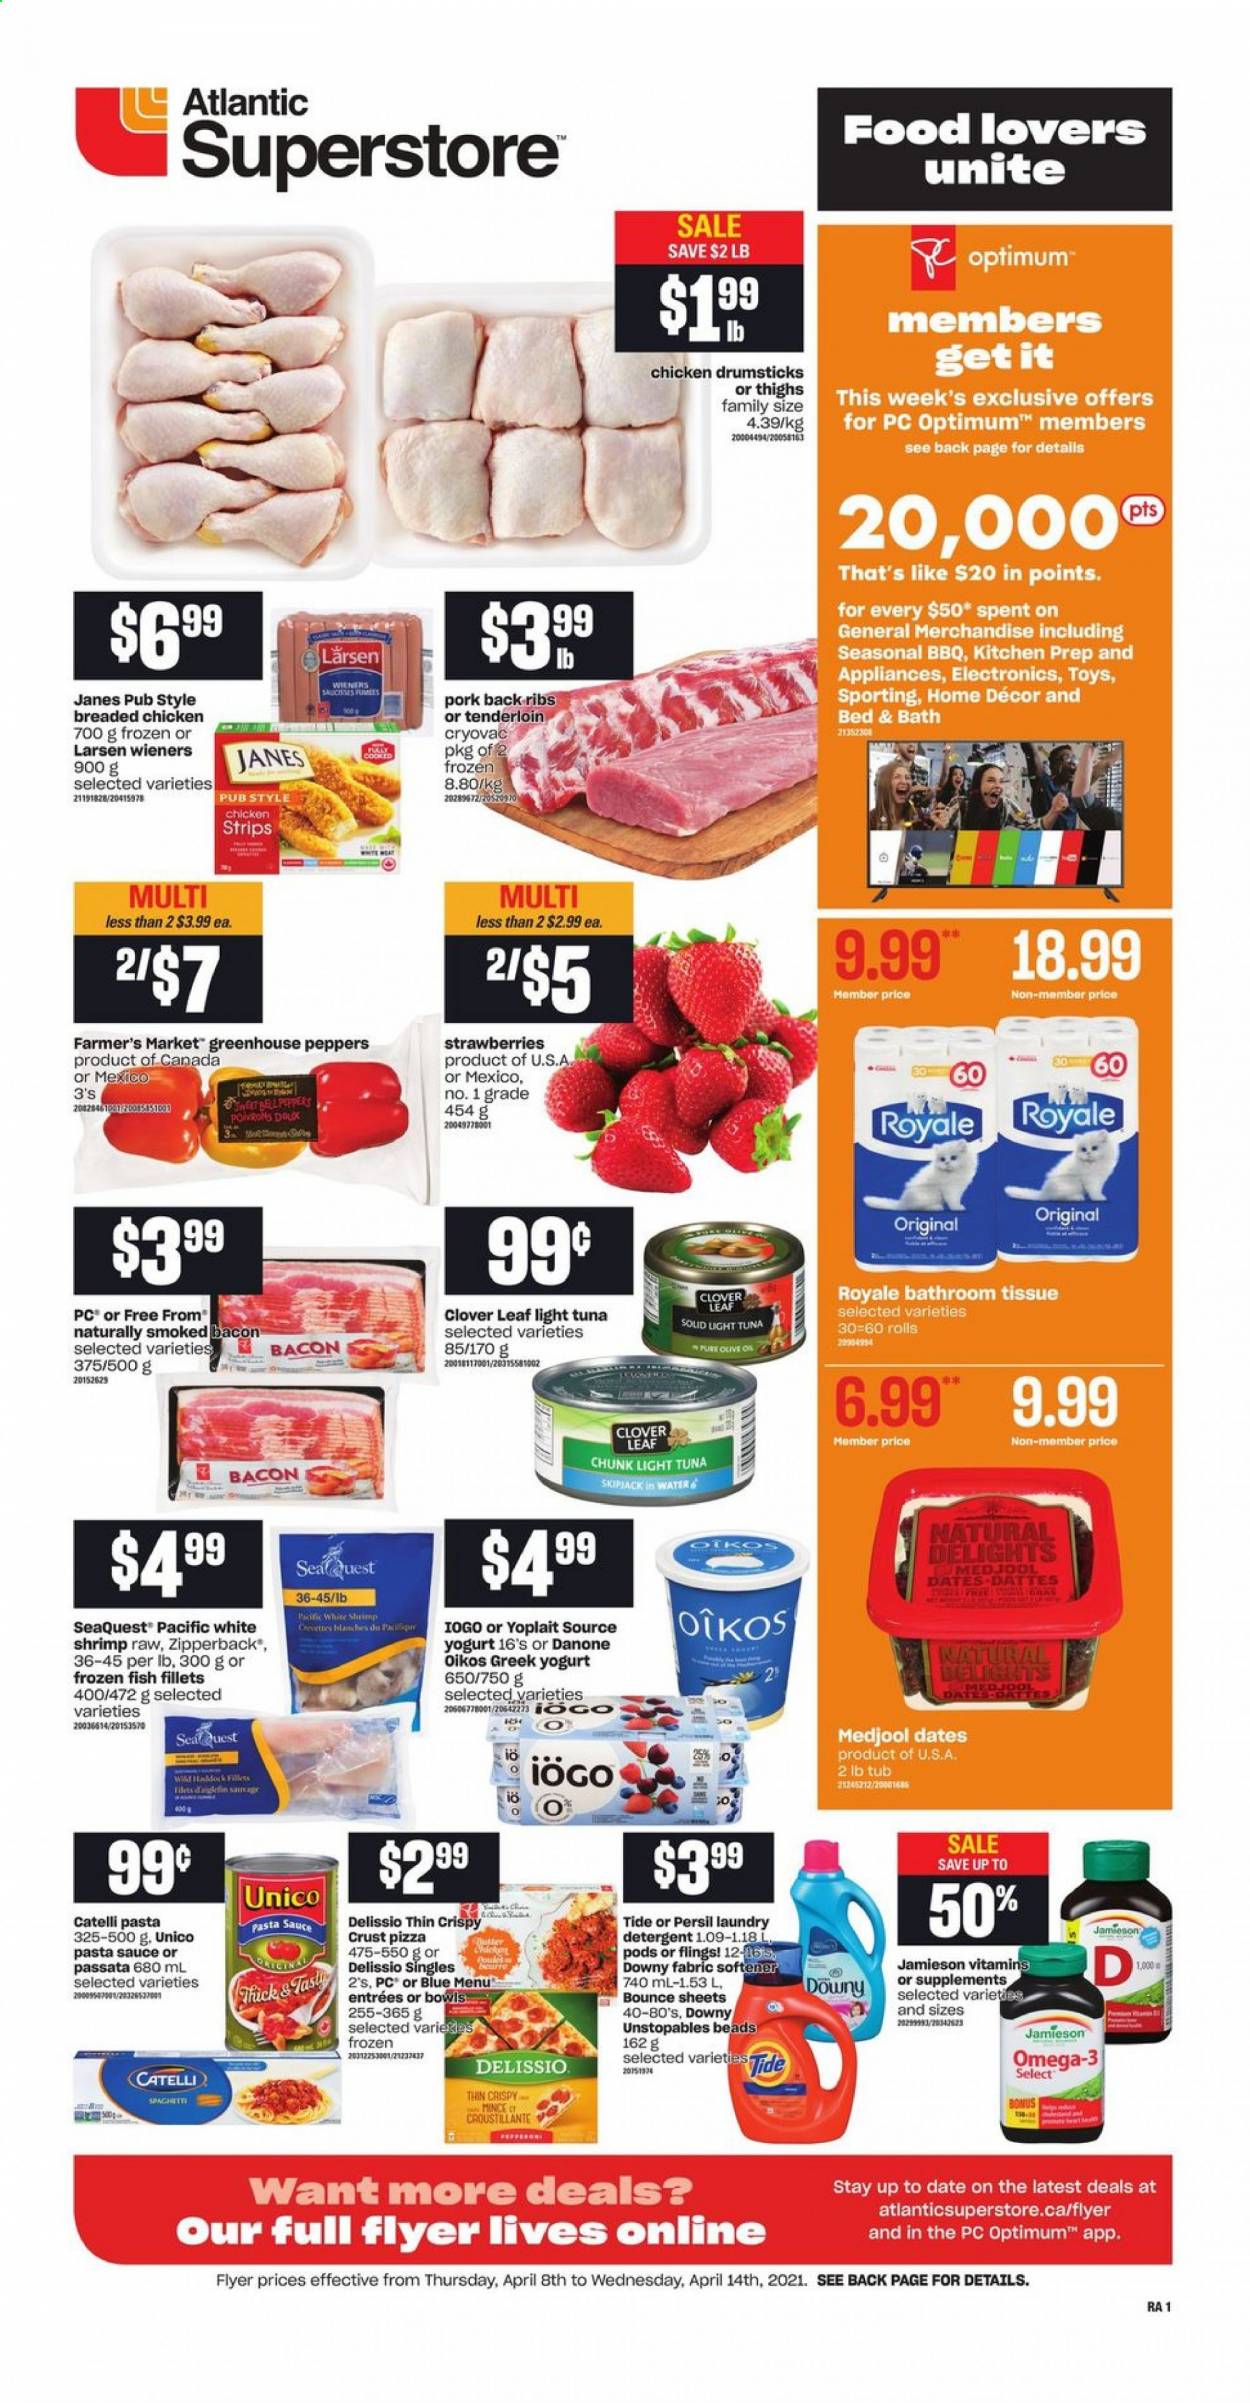 thumbnail - Atlantic Superstore Flyer - April 08, 2021 - April 14, 2021 - Sales products - peppers, strawberries, fish fillets, tuna, fish, shrimps, spaghetti, pizza, pasta sauce, fried chicken, bacon, greek yoghurt, yoghurt, Clover, Oikos, Yoplait, strips, chicken strips, light tuna, pepper, dried dates, chicken drumsticks, chicken, pork meat, pork ribs, pork back ribs, bath tissue, Tide, Unstopables, Persil, fabric softener, laundry detergent, Bounce, Downy Laundry, Optimum, Omega-3, Danone. Page 1.